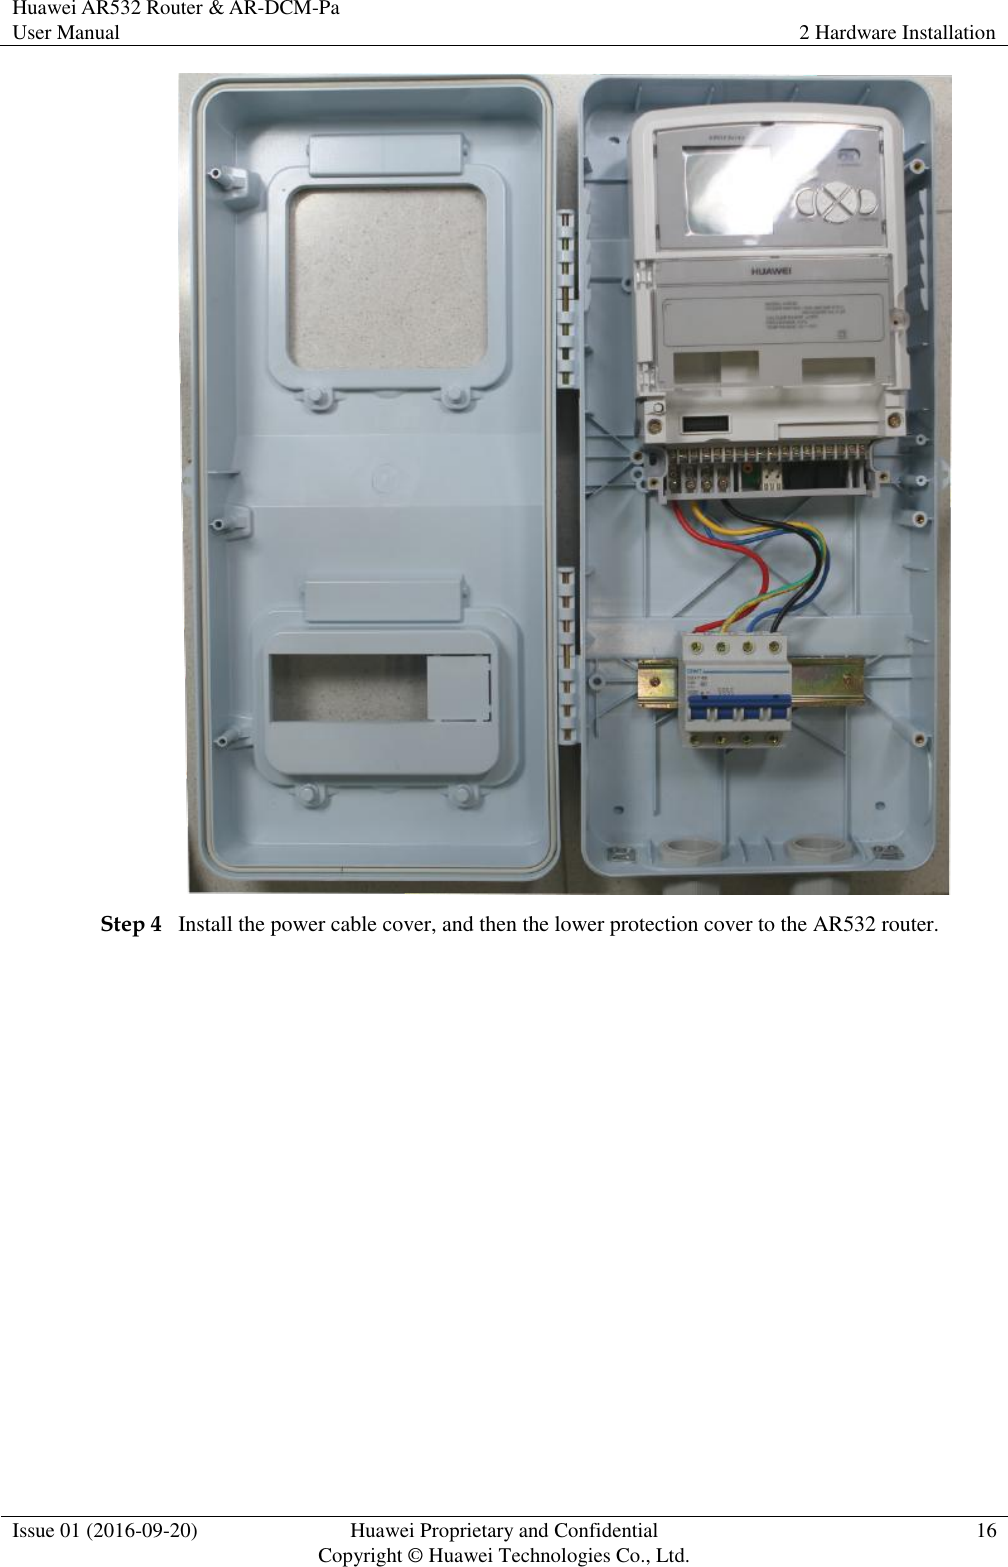 Huawei AR532 Router &amp; AR-DCM-Pa User Manual 2 Hardware Installation  Issue 01 (2016-09-20) Huawei Proprietary and Confidential                                     Copyright © Huawei Technologies Co., Ltd. 16   Step 4 Install the power cable cover, and then the lower protection cover to the AR532 router. 